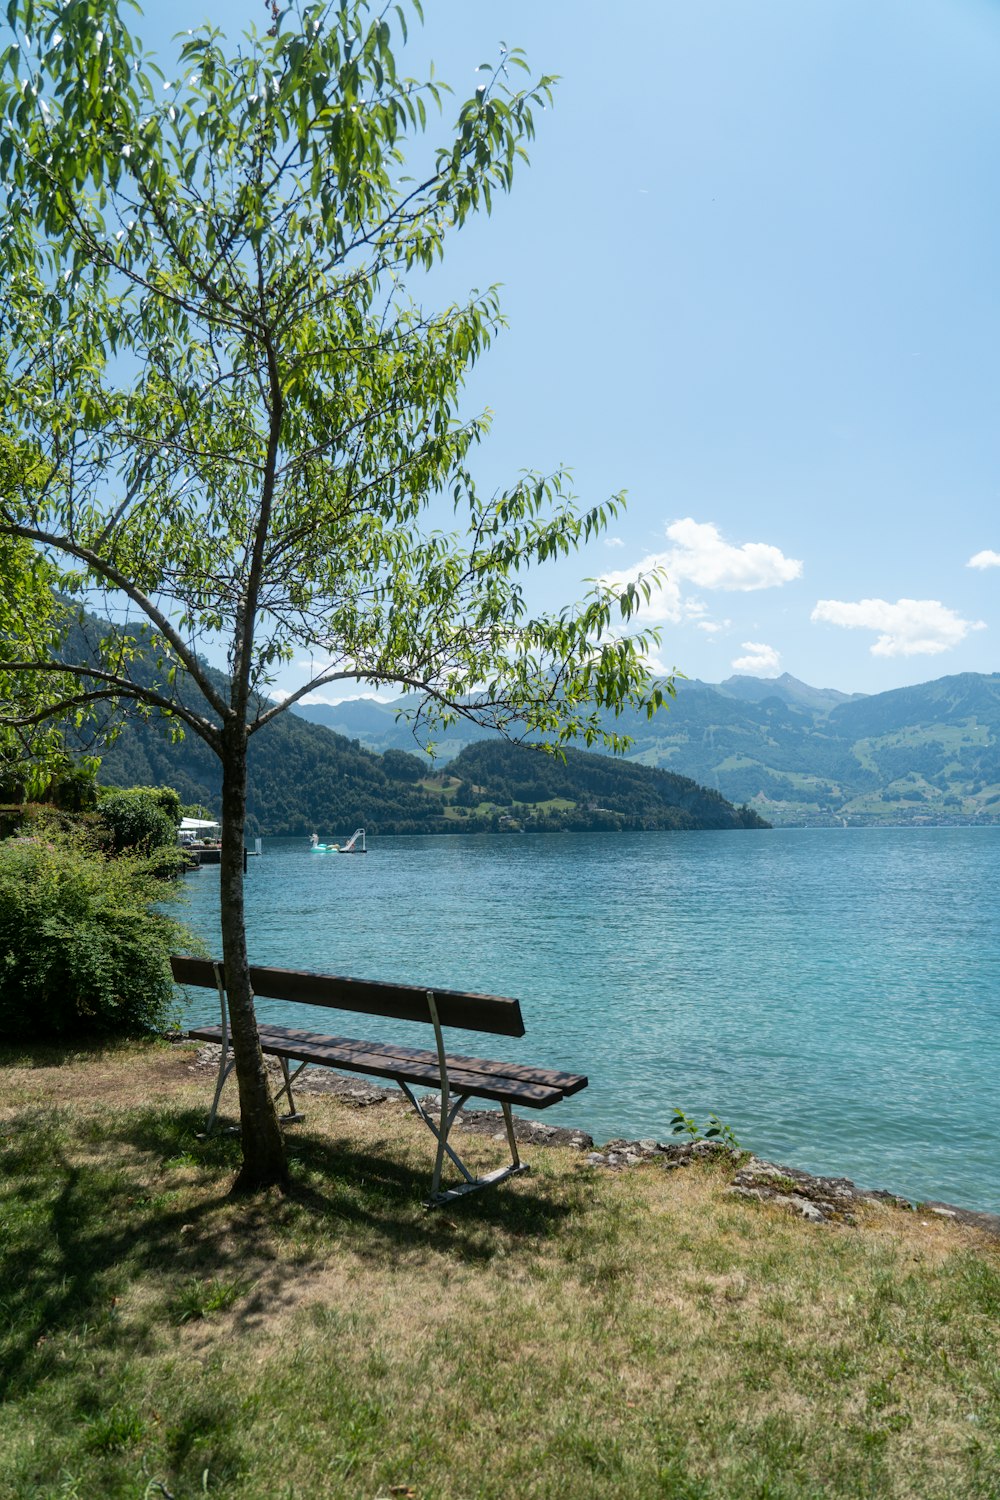 a wooden bench sitting next to a tree near a body of water